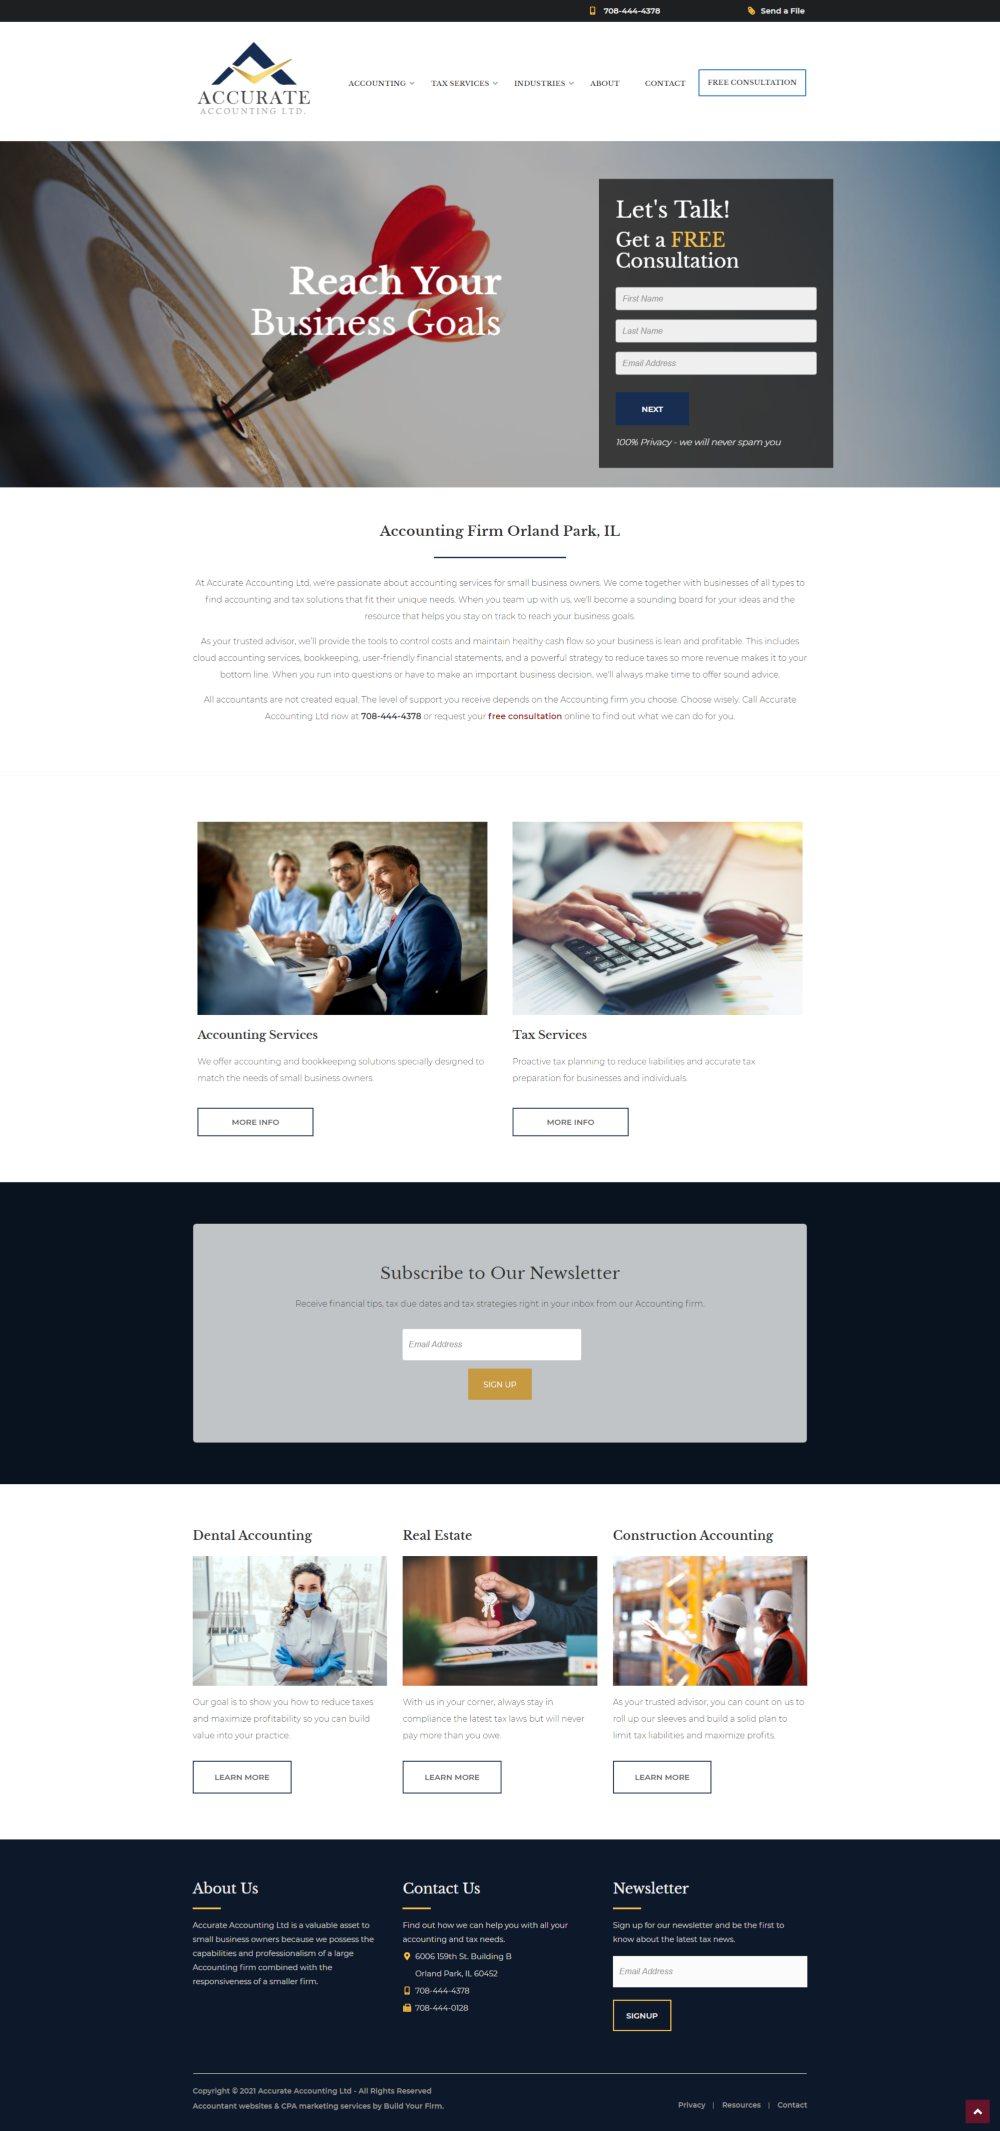 Website of Accurate Accounting